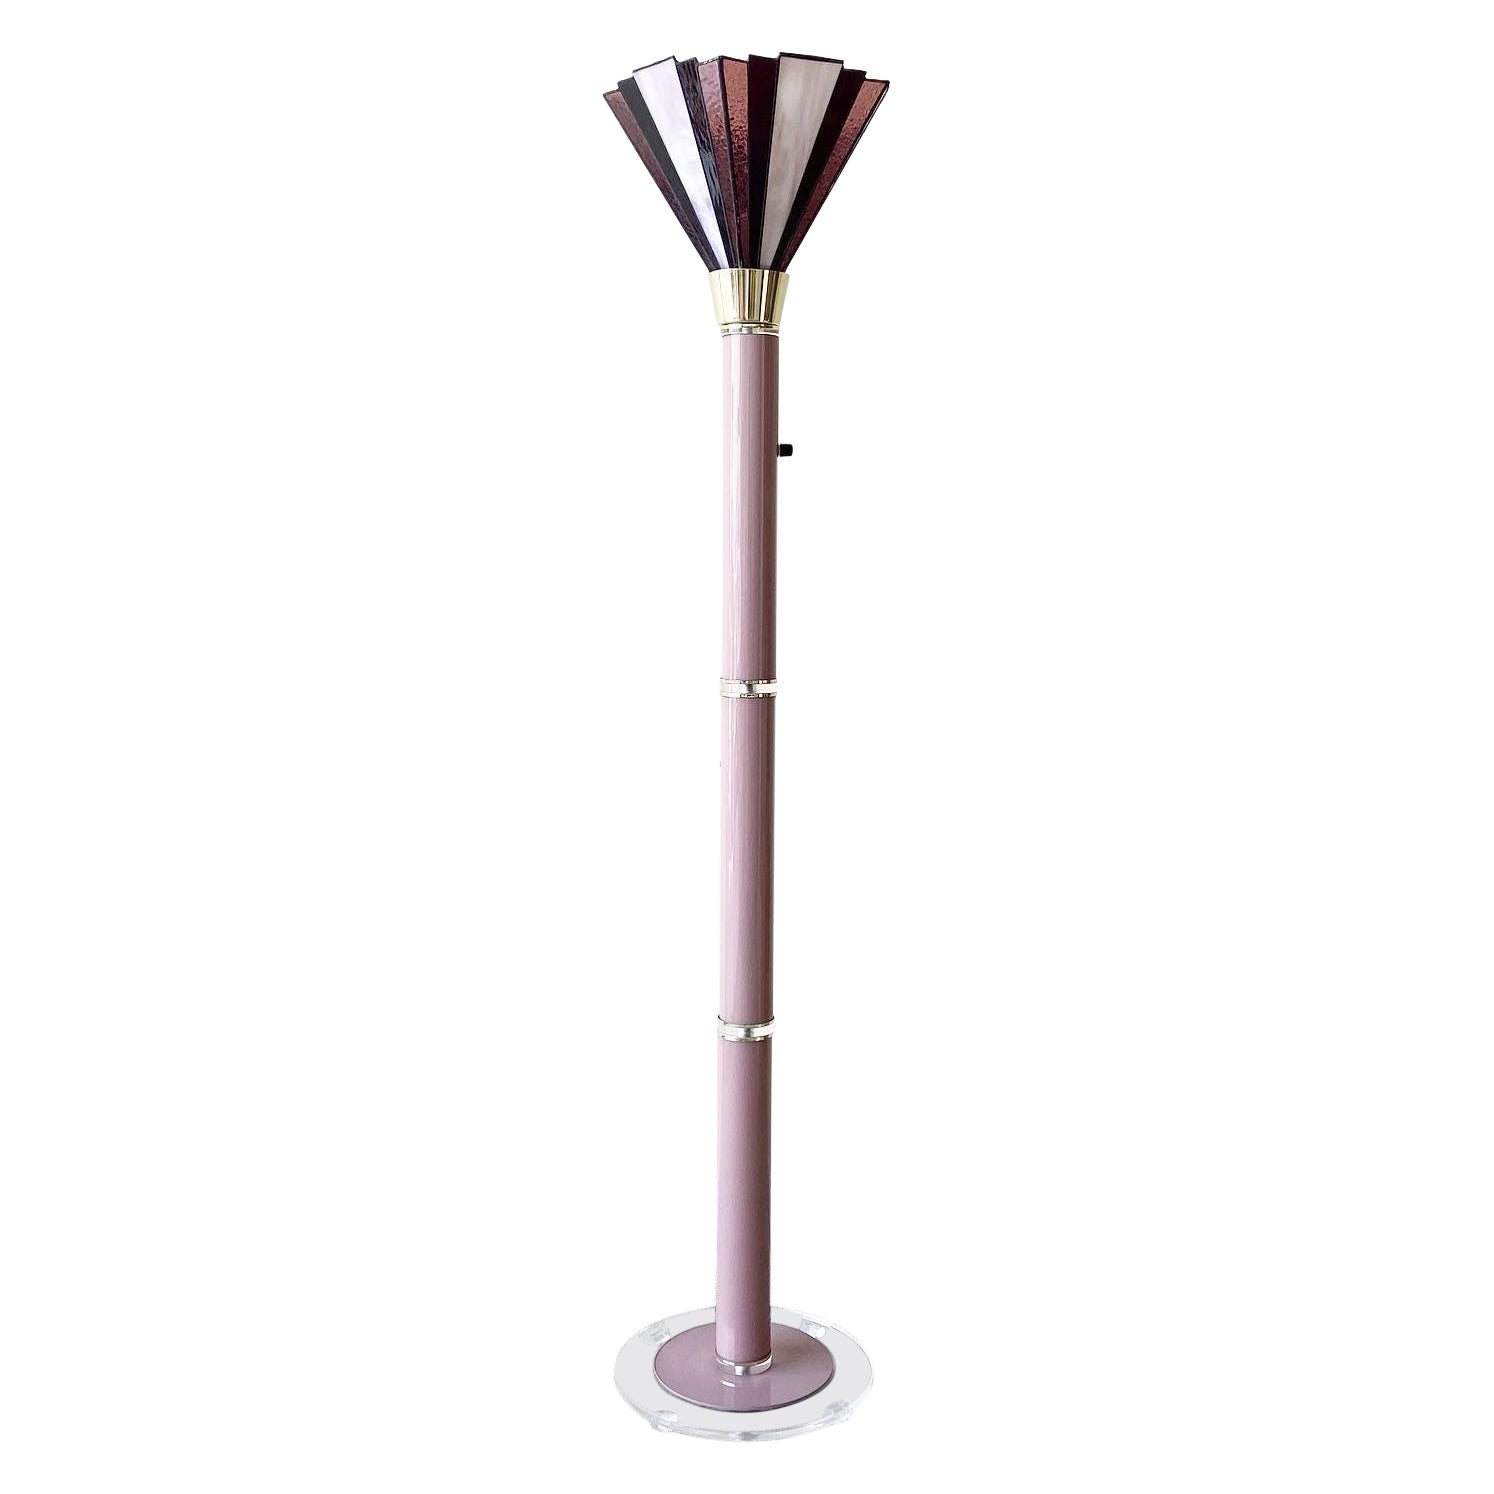 What is a torchiere floor lamp?